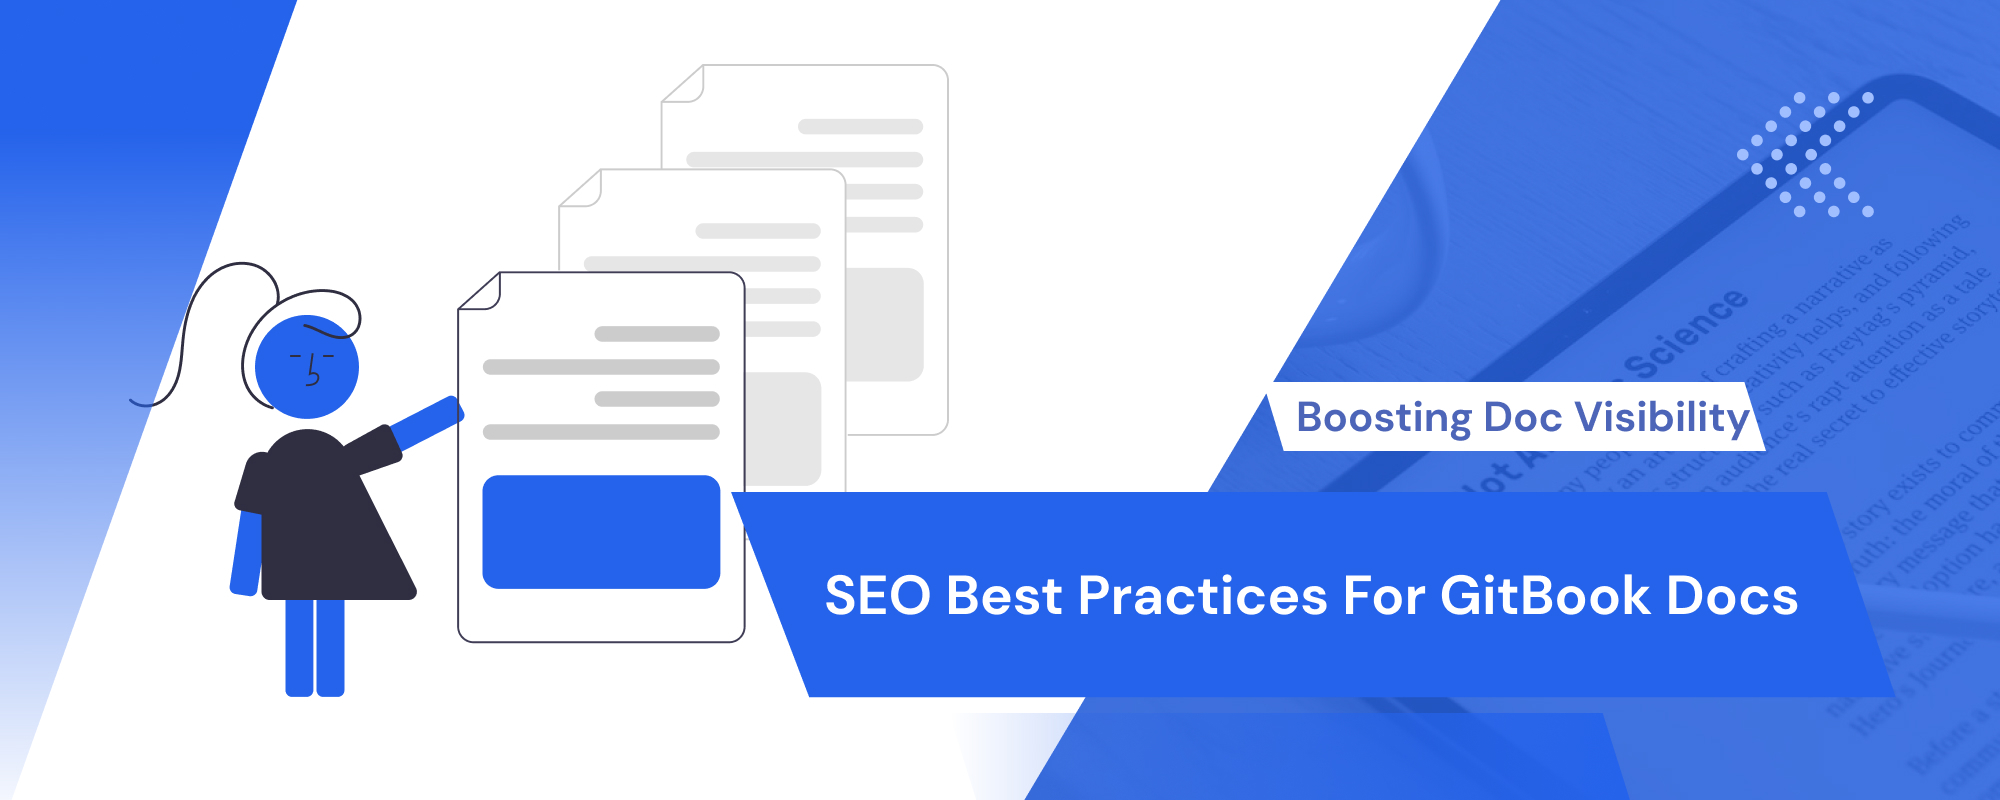 SEO Best Practices for GitBook Docs: Boosting Visibility